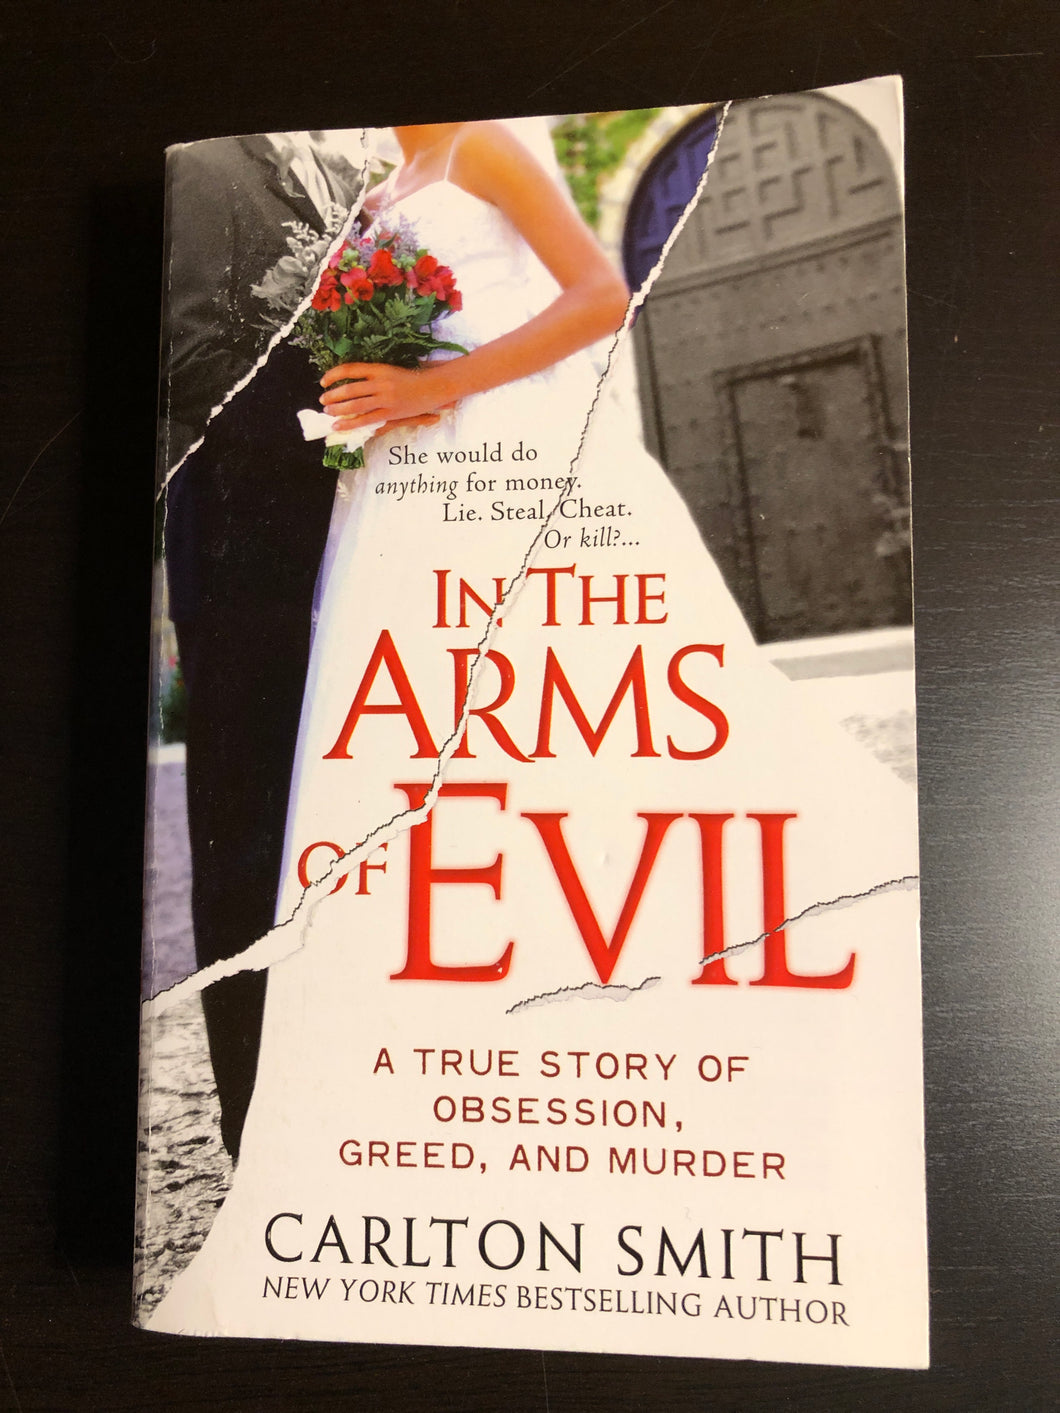 In The Arms Of Evil: A True Story of Obsession, Greed, and Murder